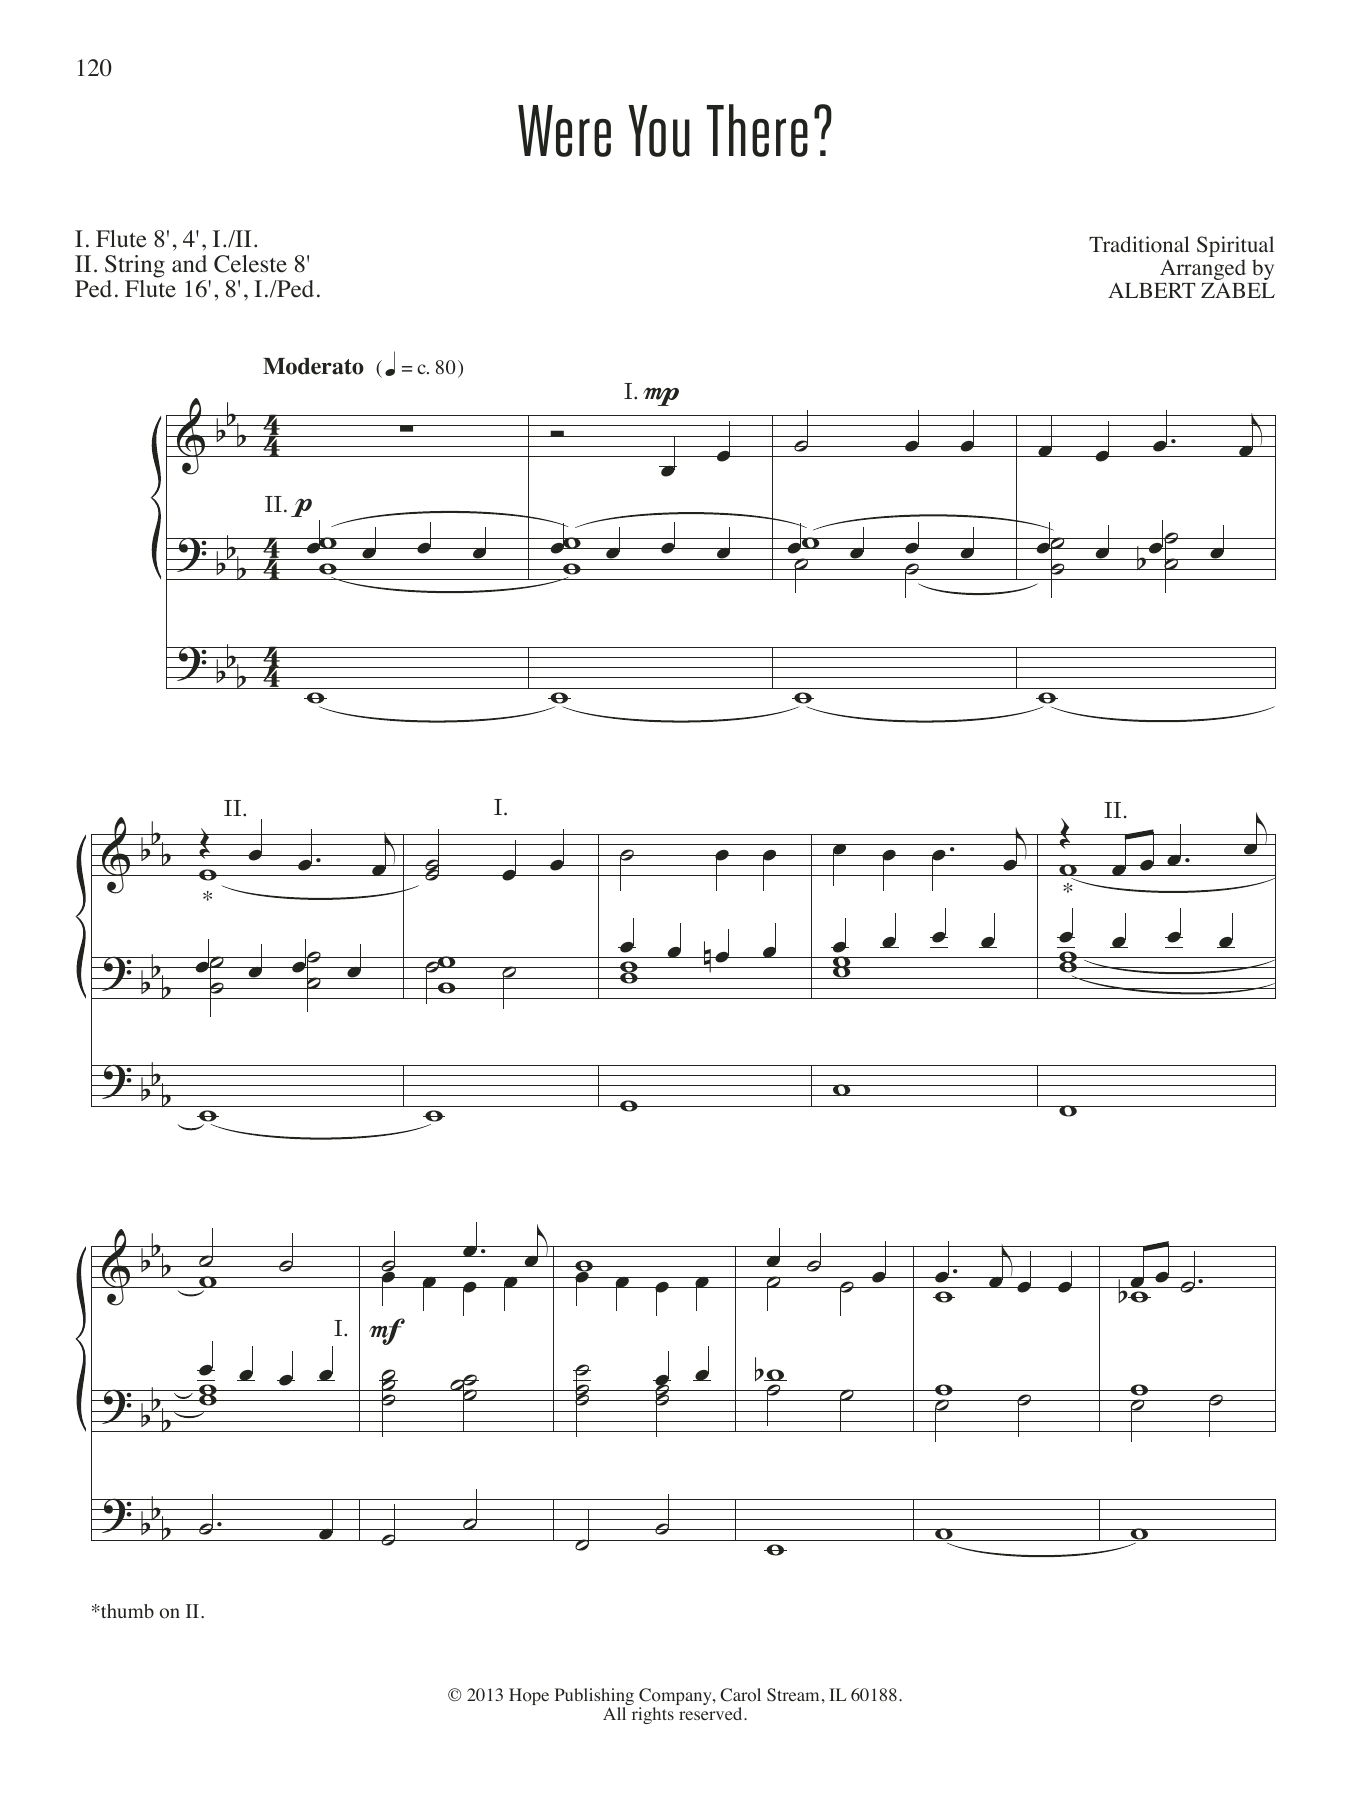 Download Albert Zabel Were You There? Sheet Music